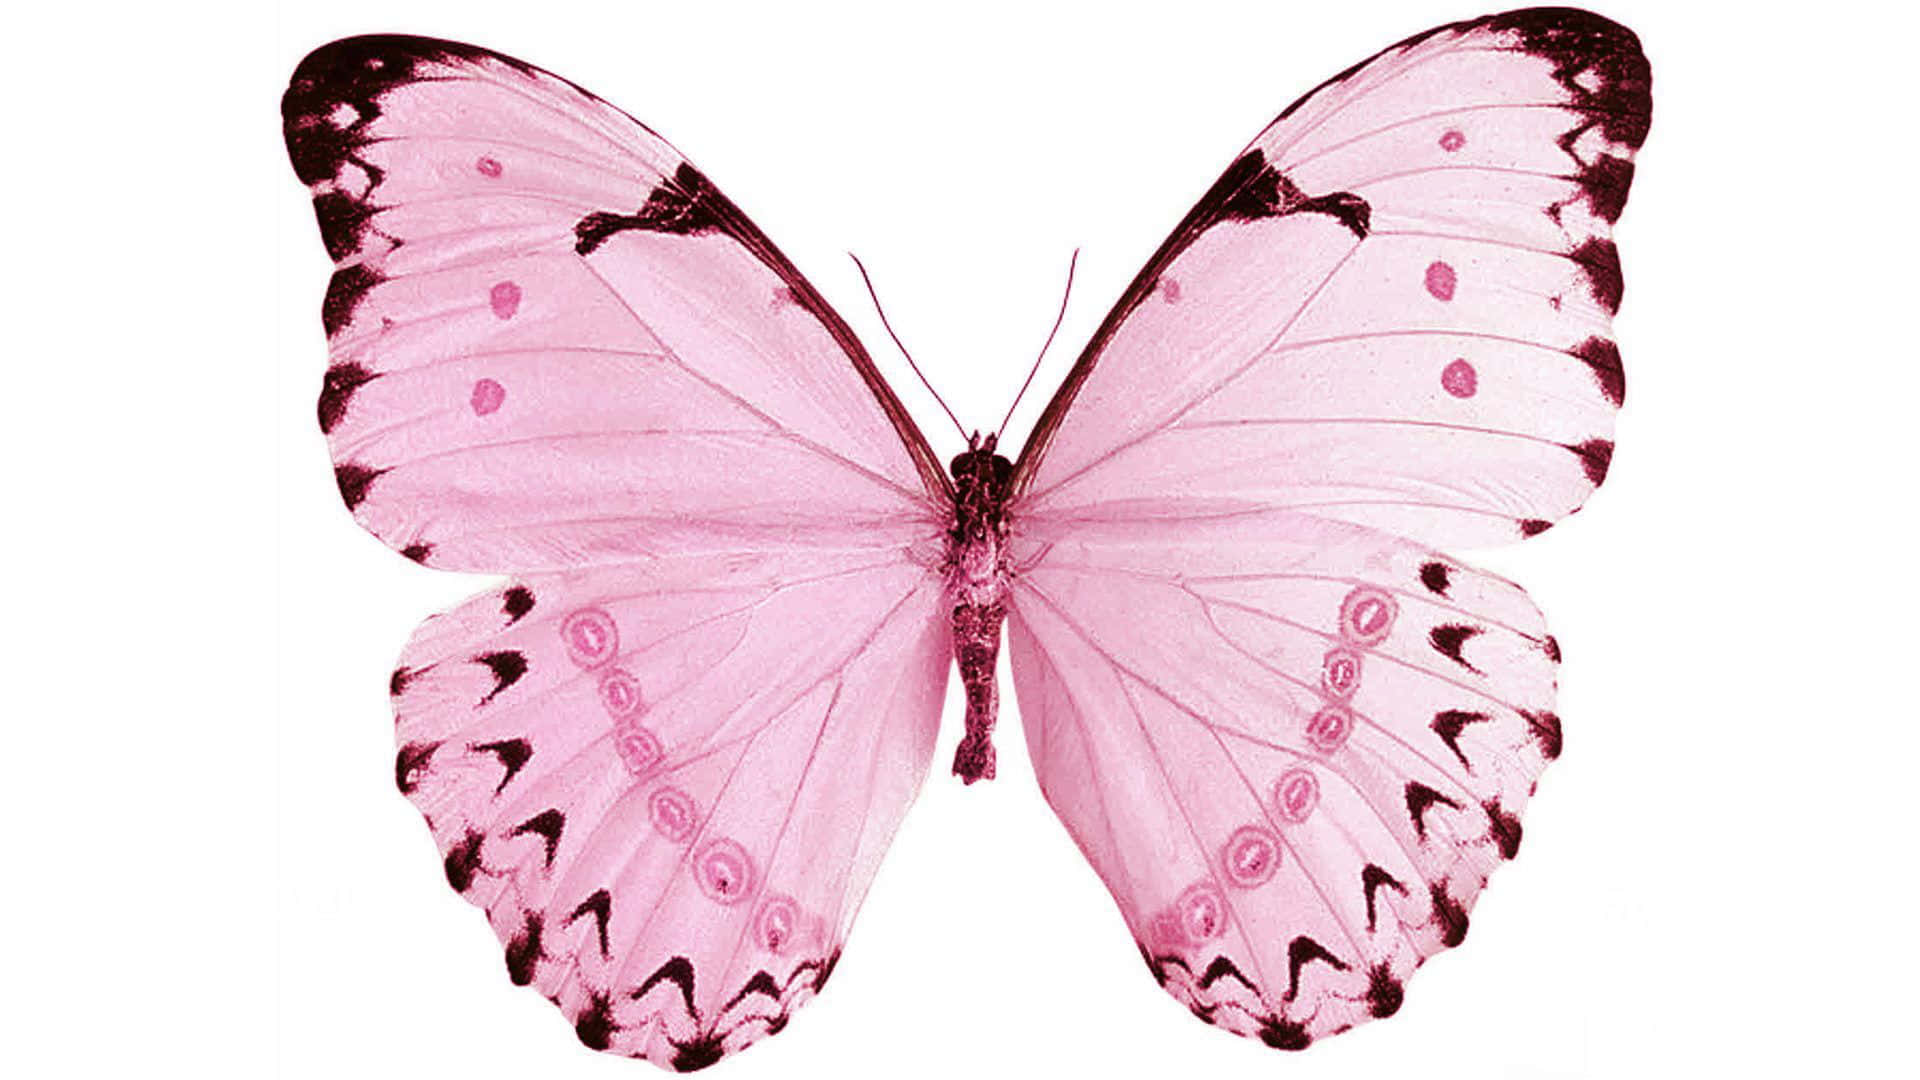 A beautiful pink butterfly perched on a green leaf